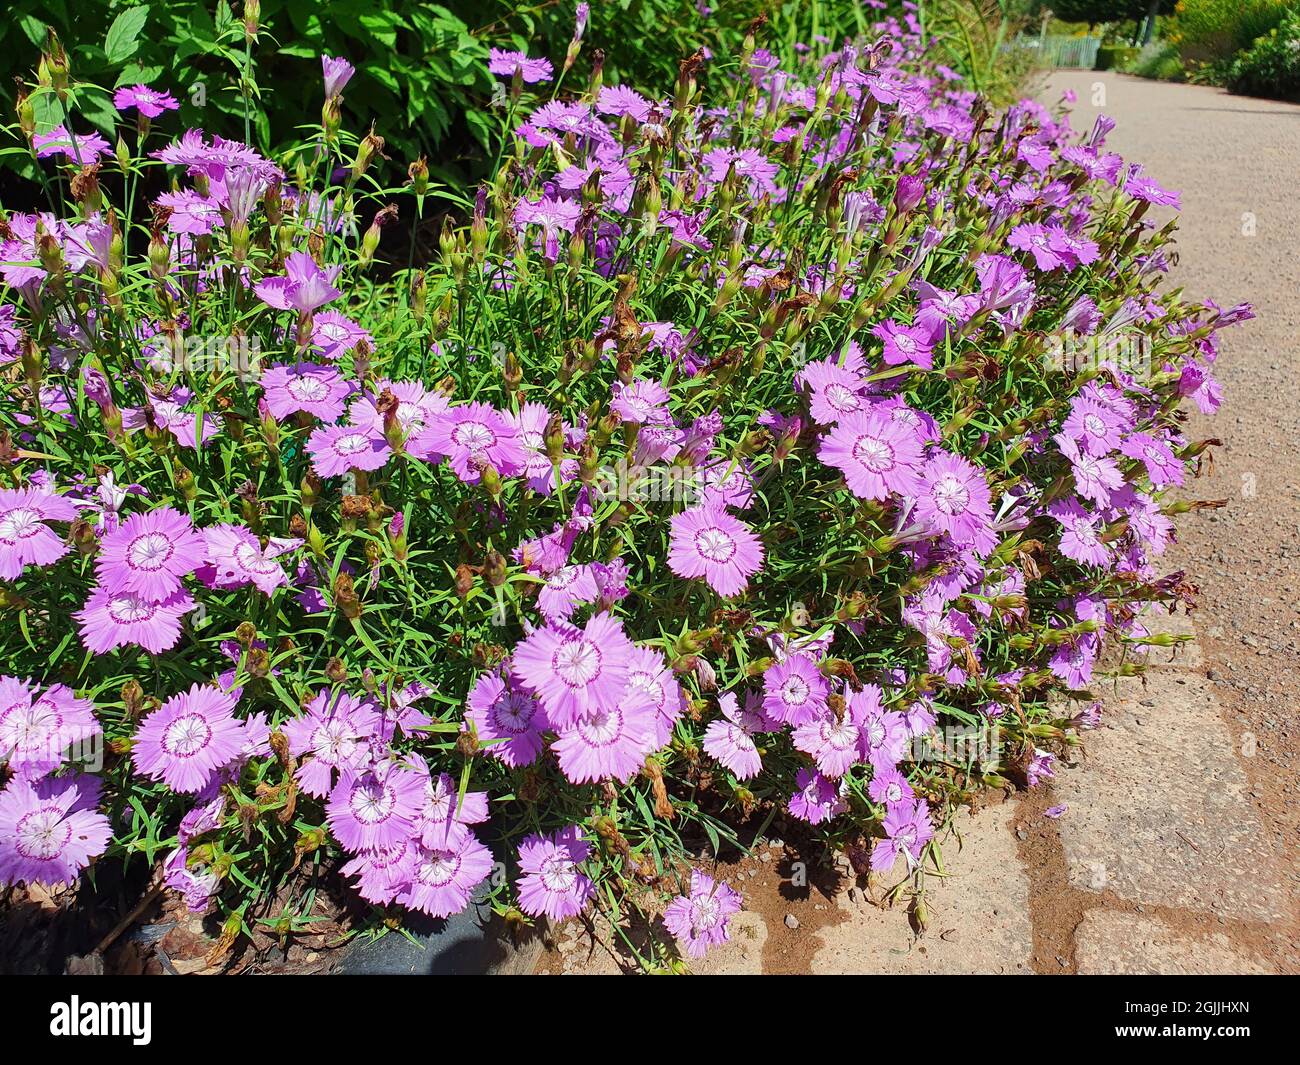 Dianthus amurensis 'Siberian Blue' a summer flowering plant with a light purple summertime flower, stock photo image Stock Photo